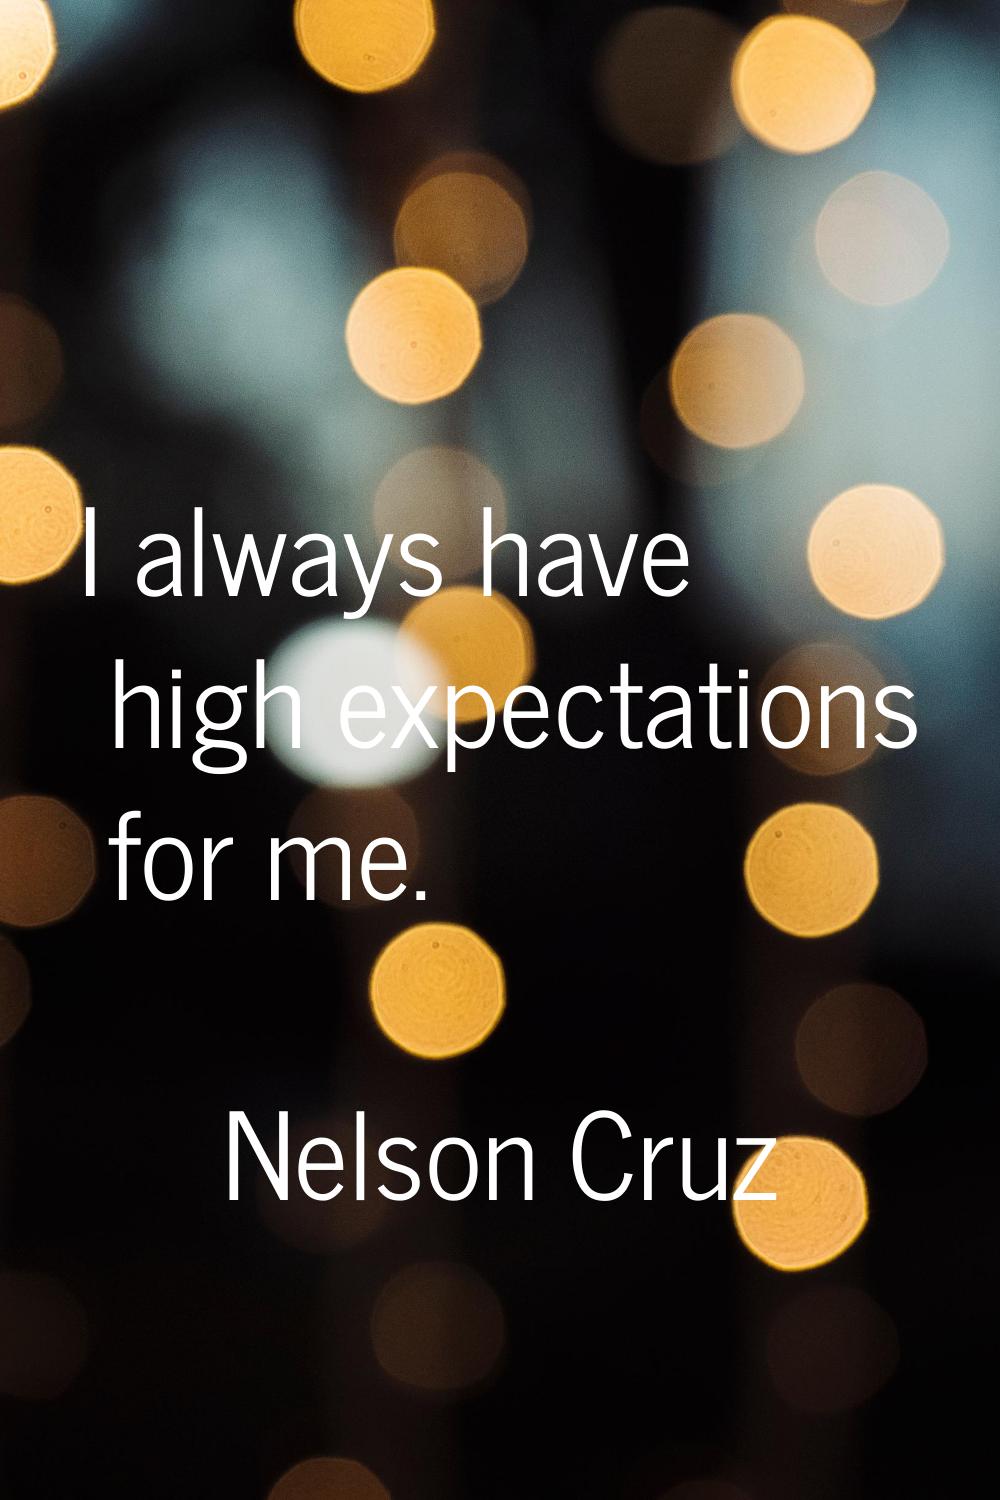 I always have high expectations for me.